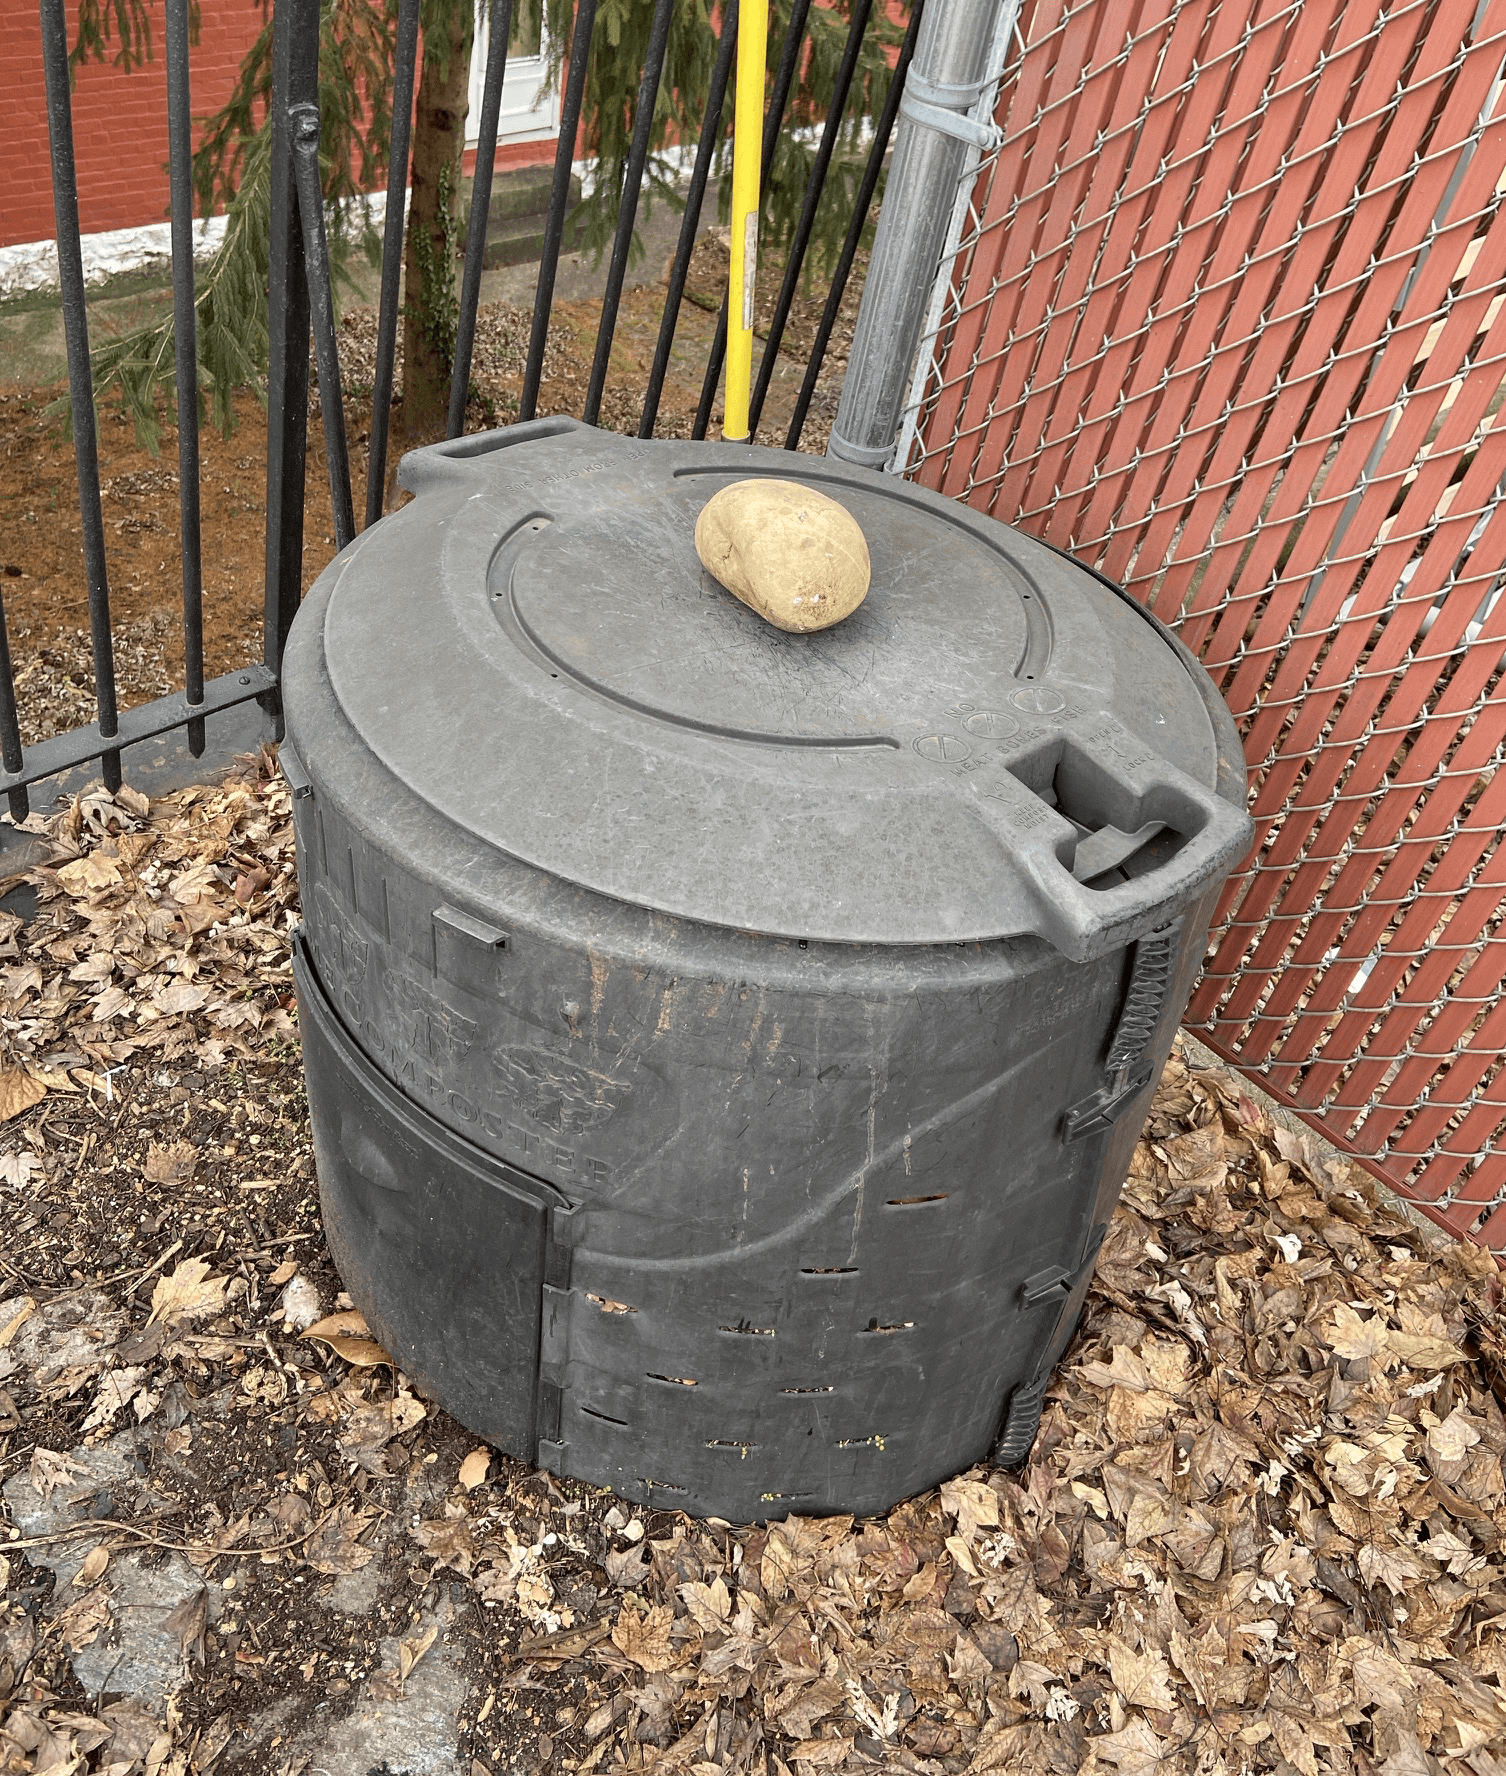 Figure 4. Collective compost bin outdoors in a fenced, leafy yard area.